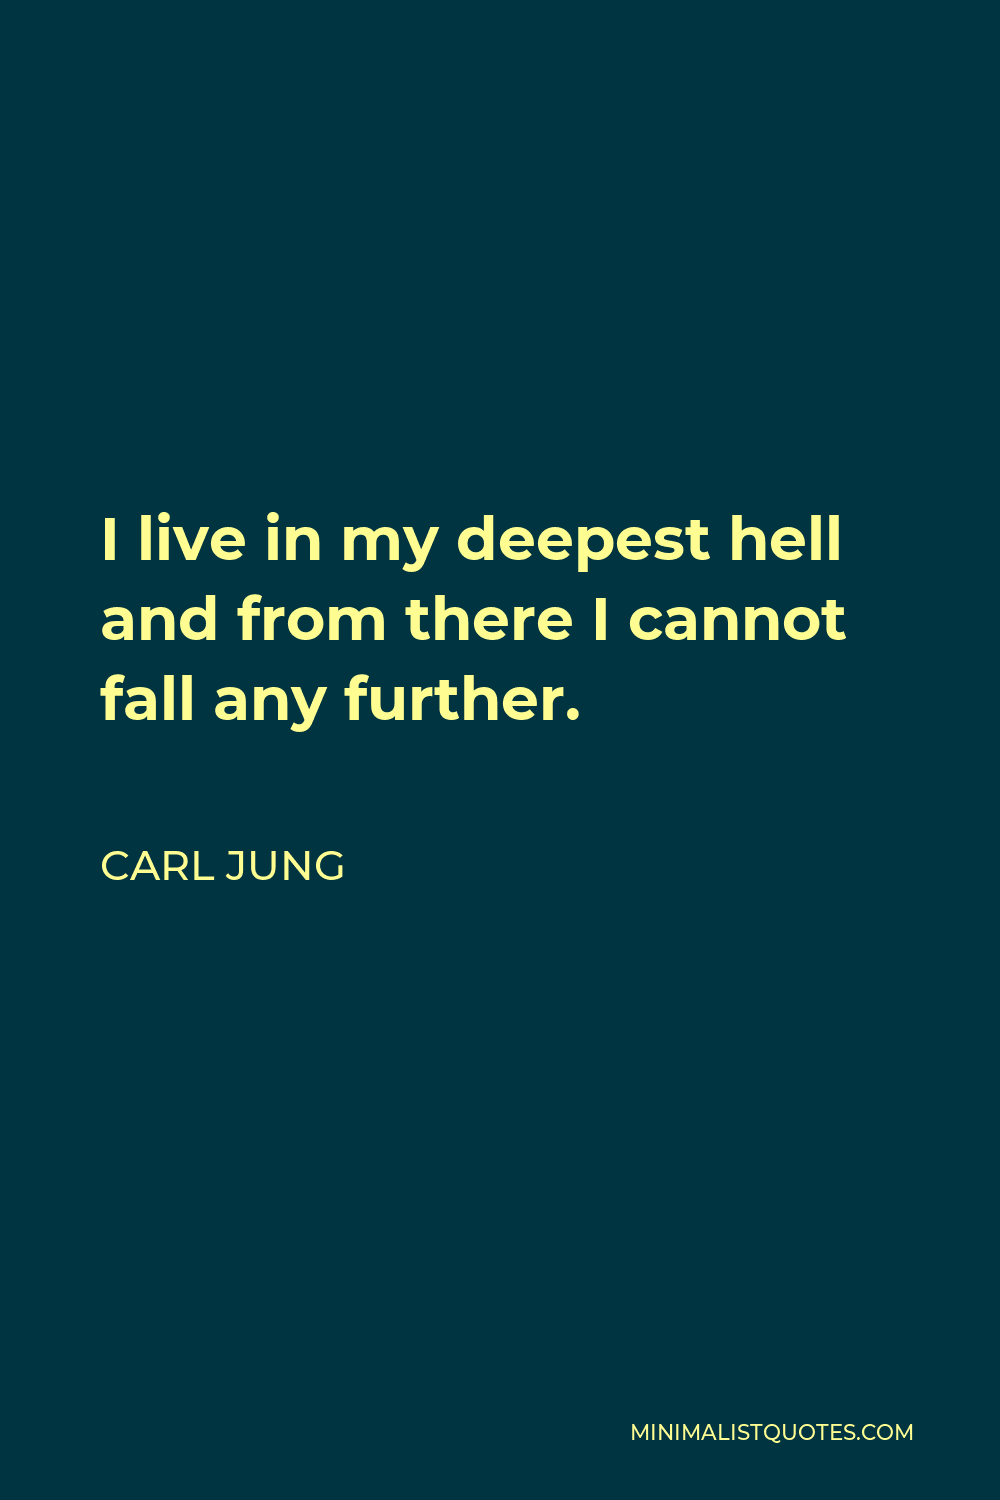 Carl Jung Quote - I live in my deepest hell and from there I cannot fall any further.